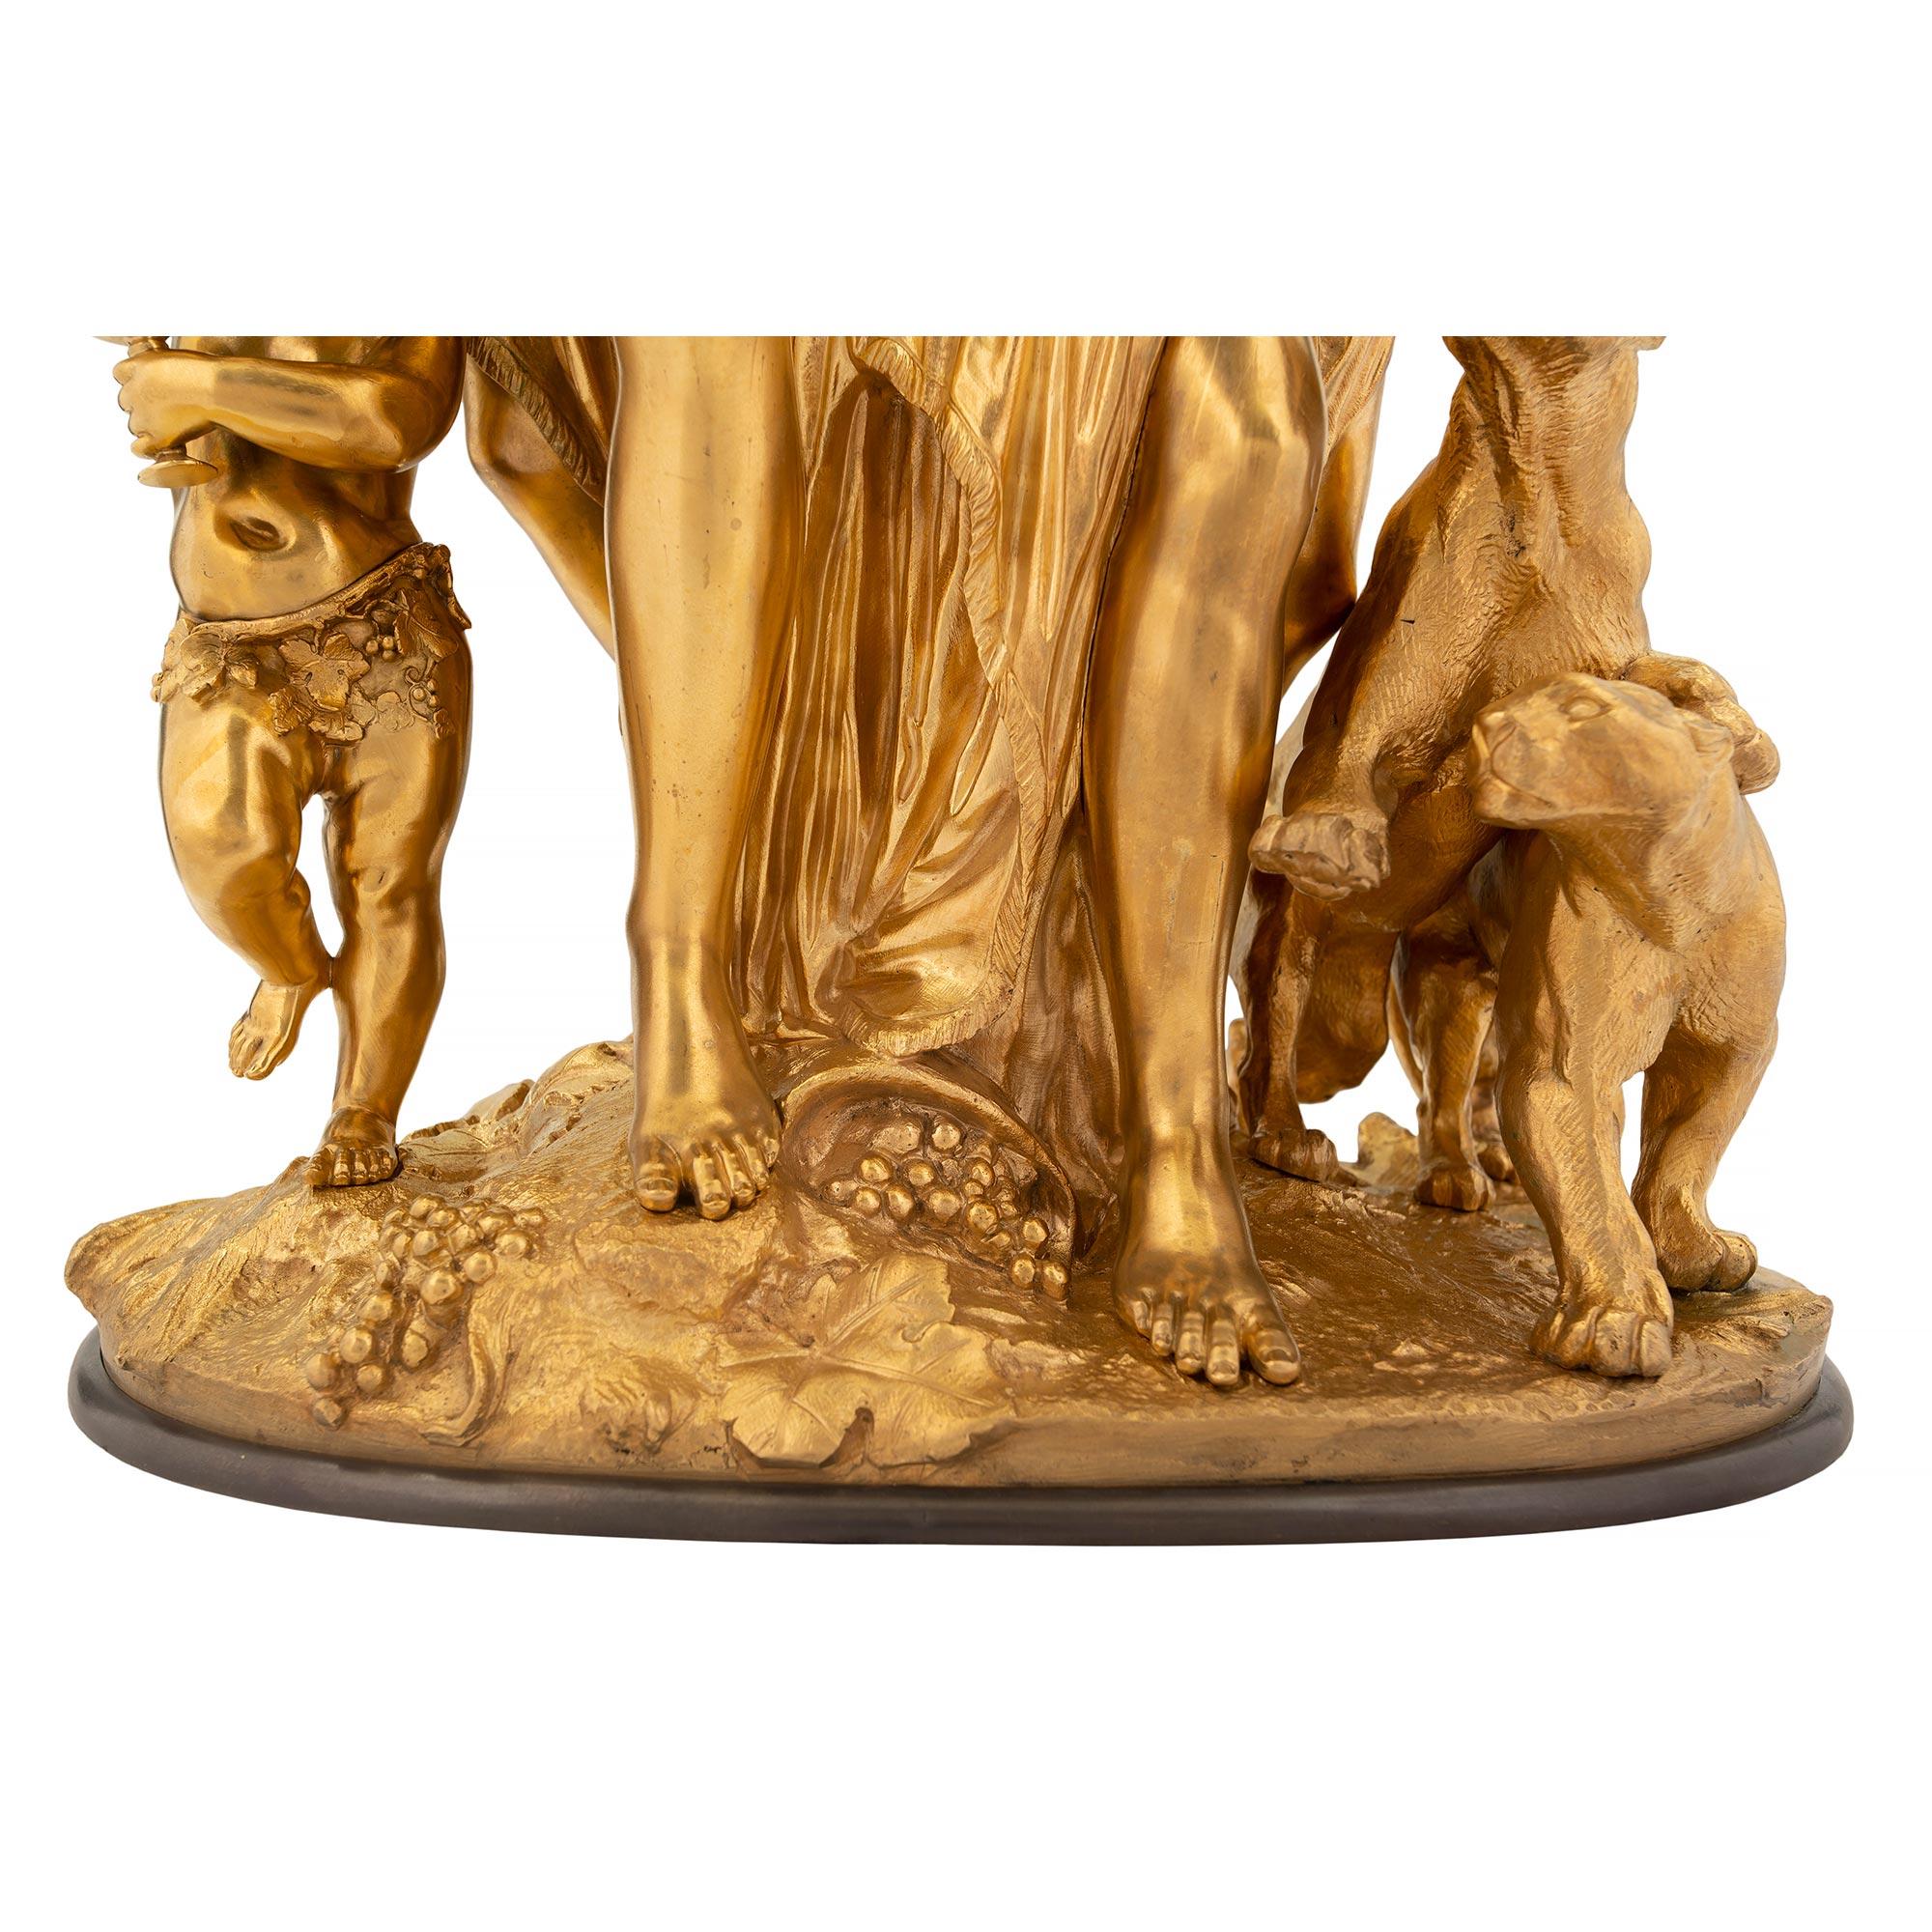 French Mid-19th Century Louis XVI Style Ormolu & Bronze Statue, Signed Delesalle For Sale 6